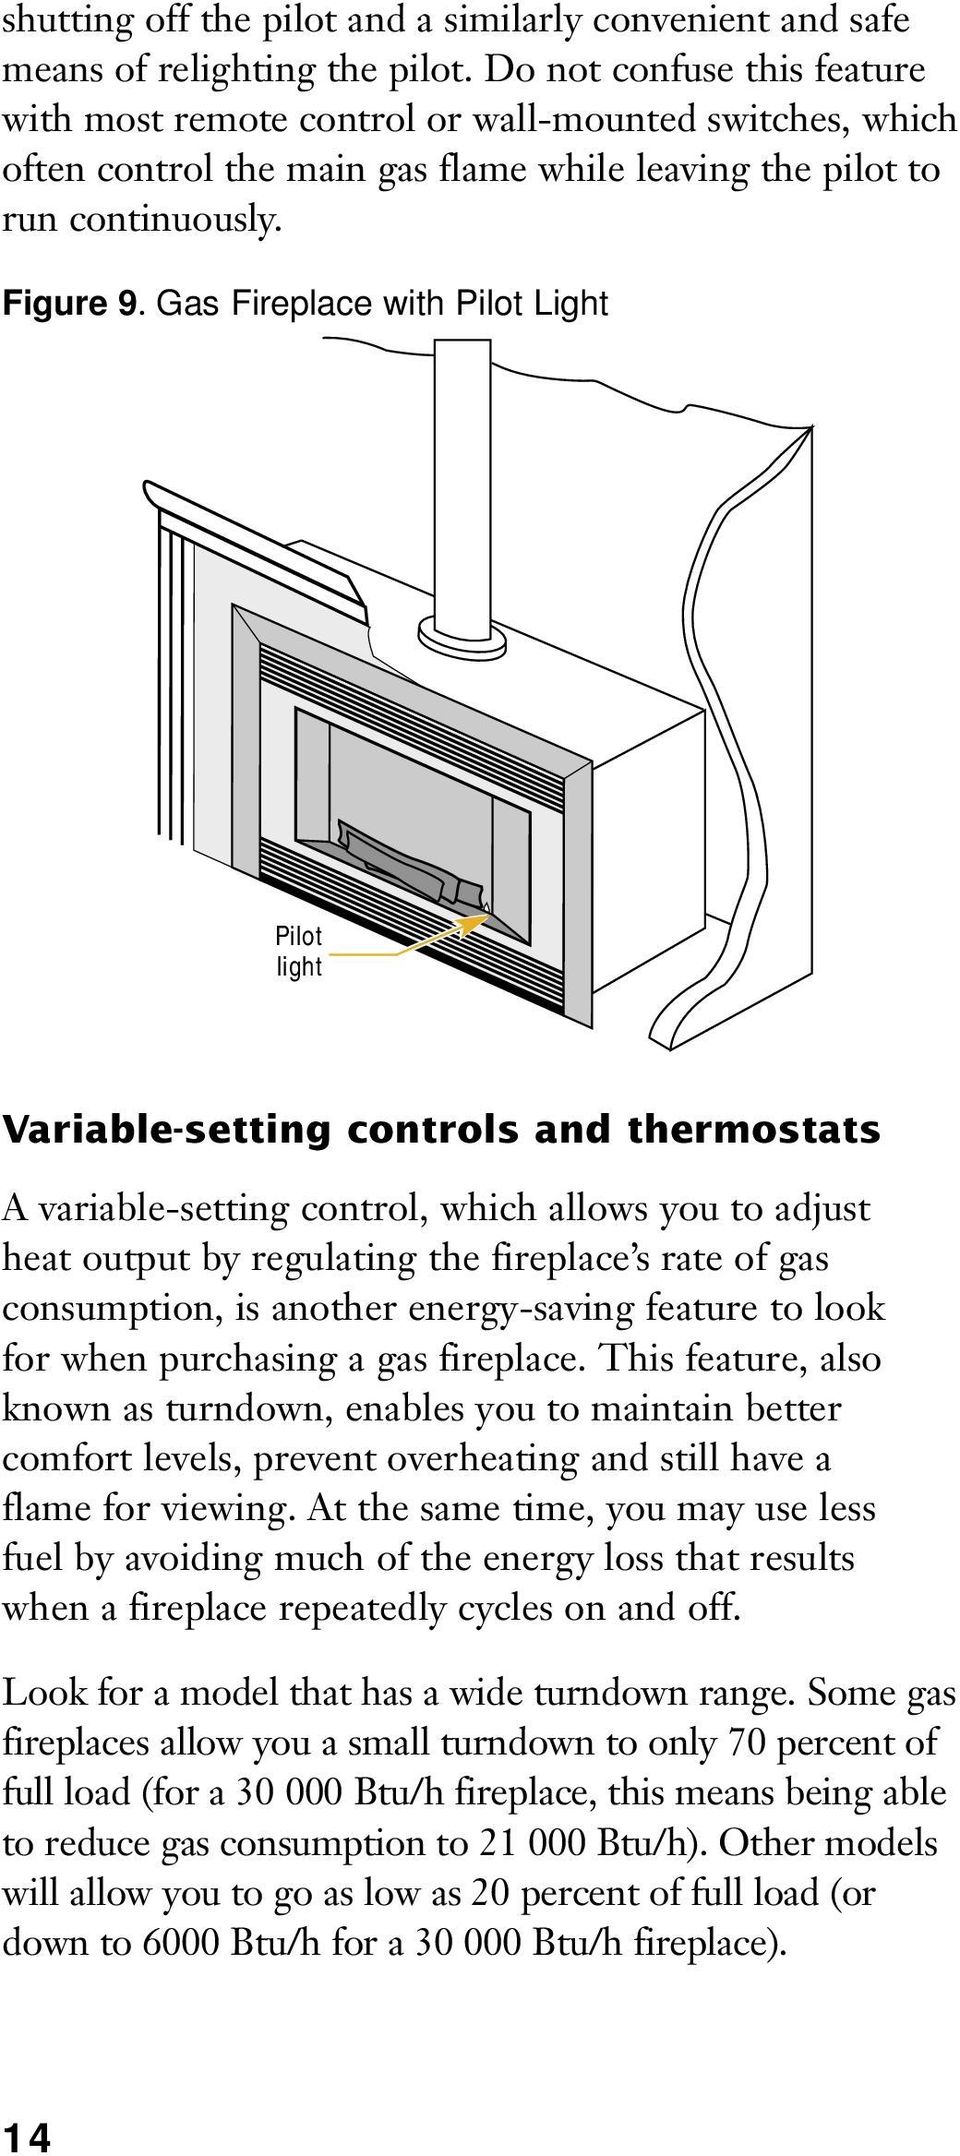 Gas Fireplace thermostats Best Of All About Gas Fireplaces Pdf Free Download